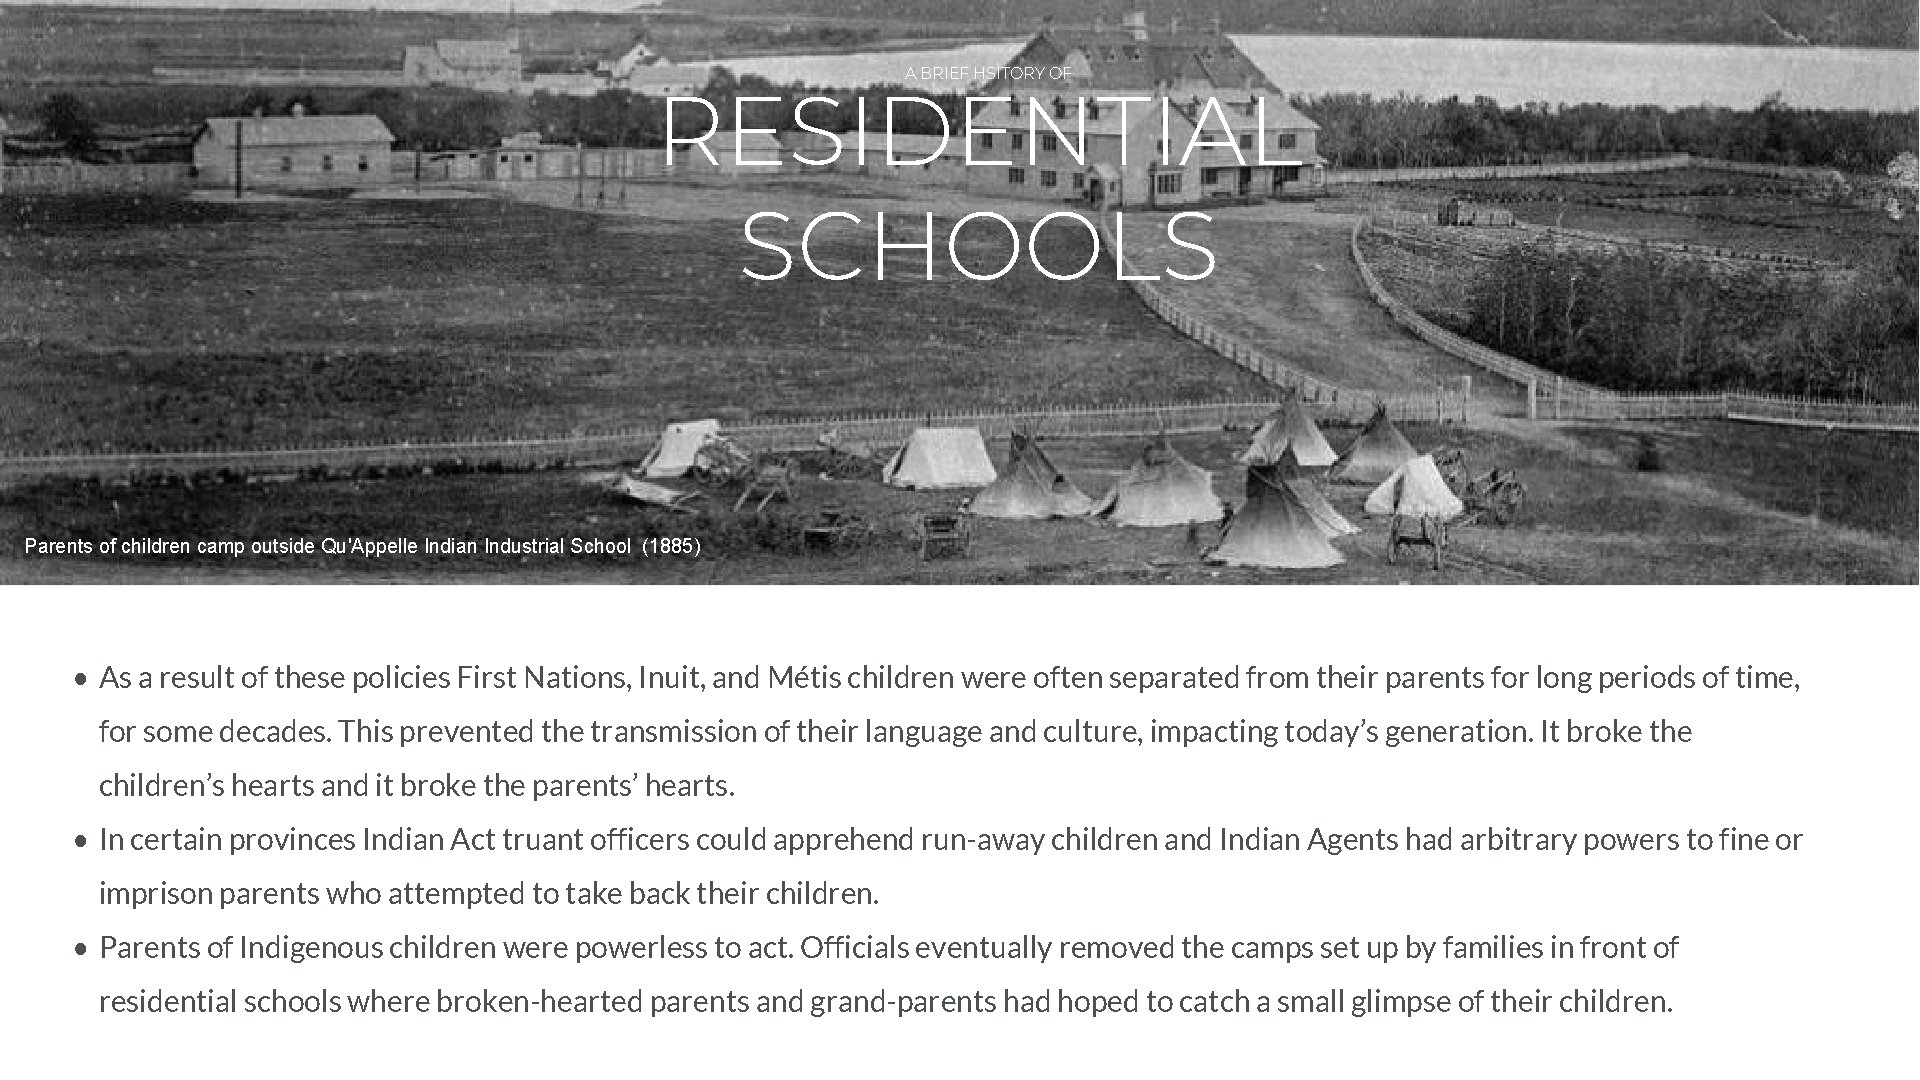 RESIDENTIAL SCHOOLS A BRIEF HSITORY OF 11 Parents of children camp outside Qu'Appelle Indian